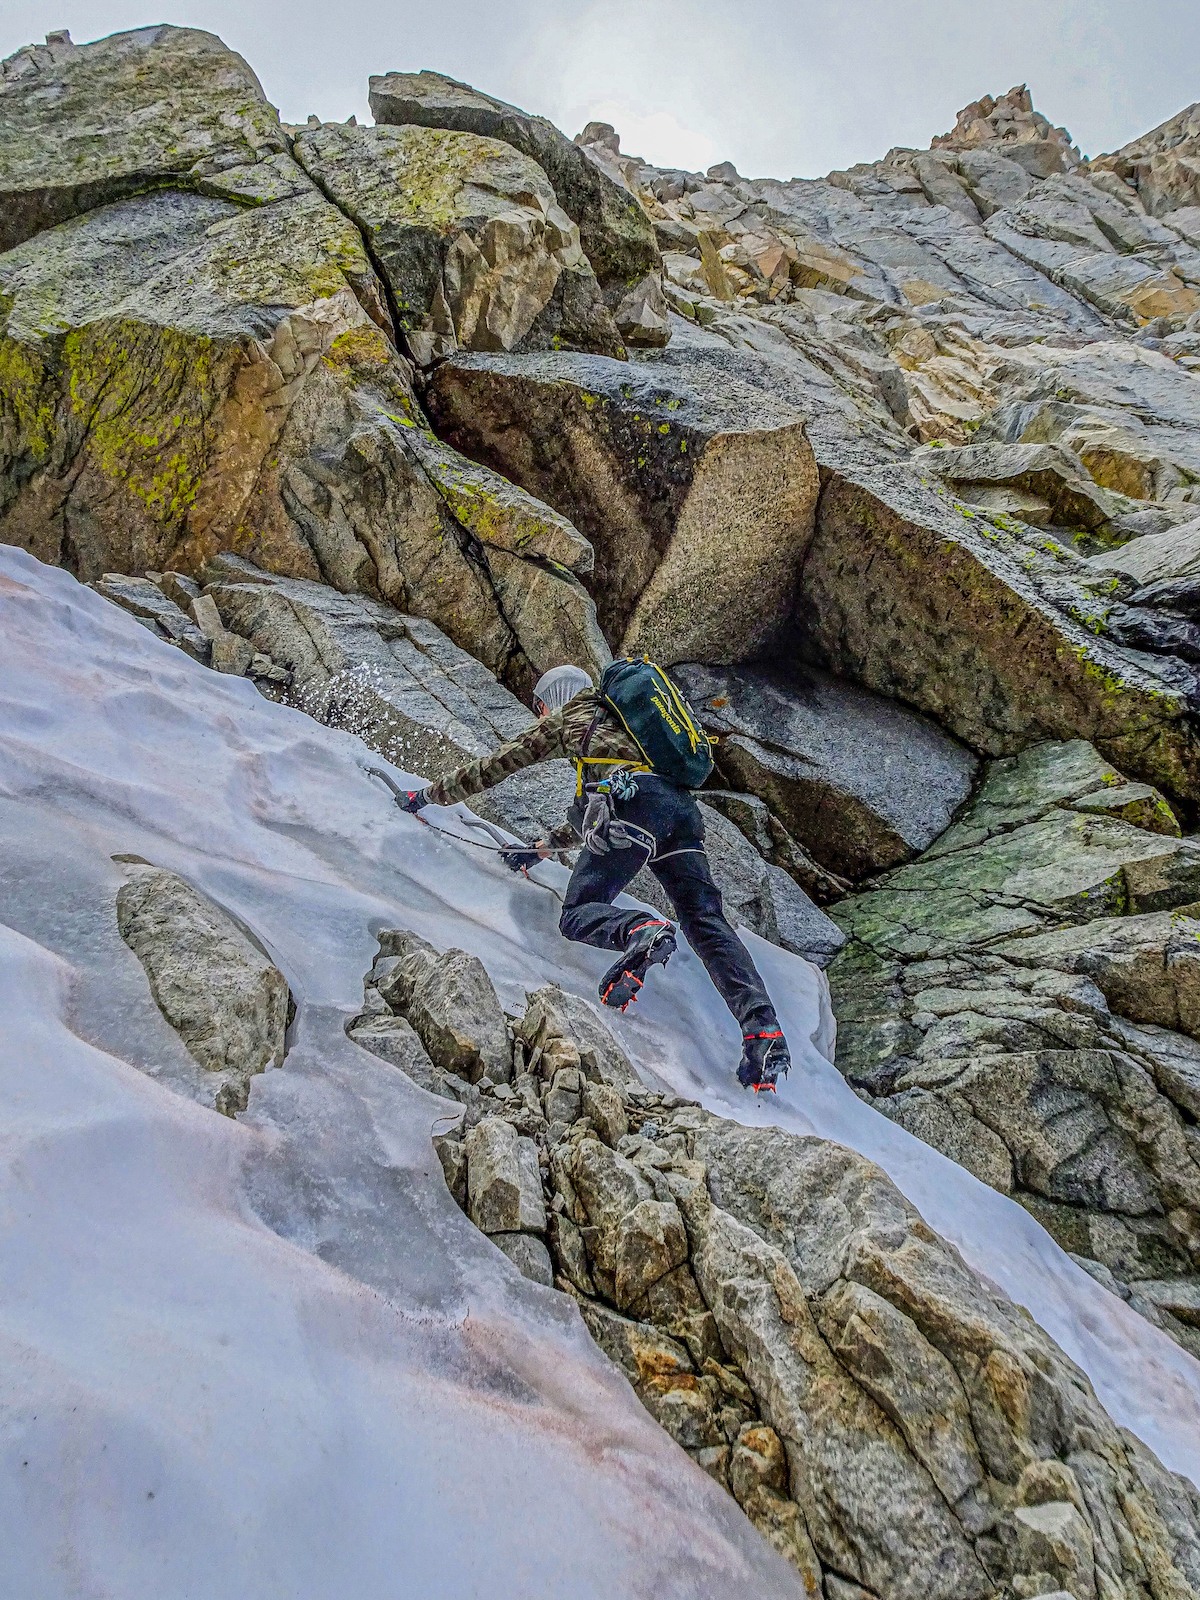 Sinker sticks in sweet summer Styrofoam (alpine ice). The Quarks are the perfect companion for icy, snicey couloirs. McCrea is pictured here in the Dress for Less Couloir, Mt. Tom Ross, Sierra Nevada Range. [Photo] Richard Shore